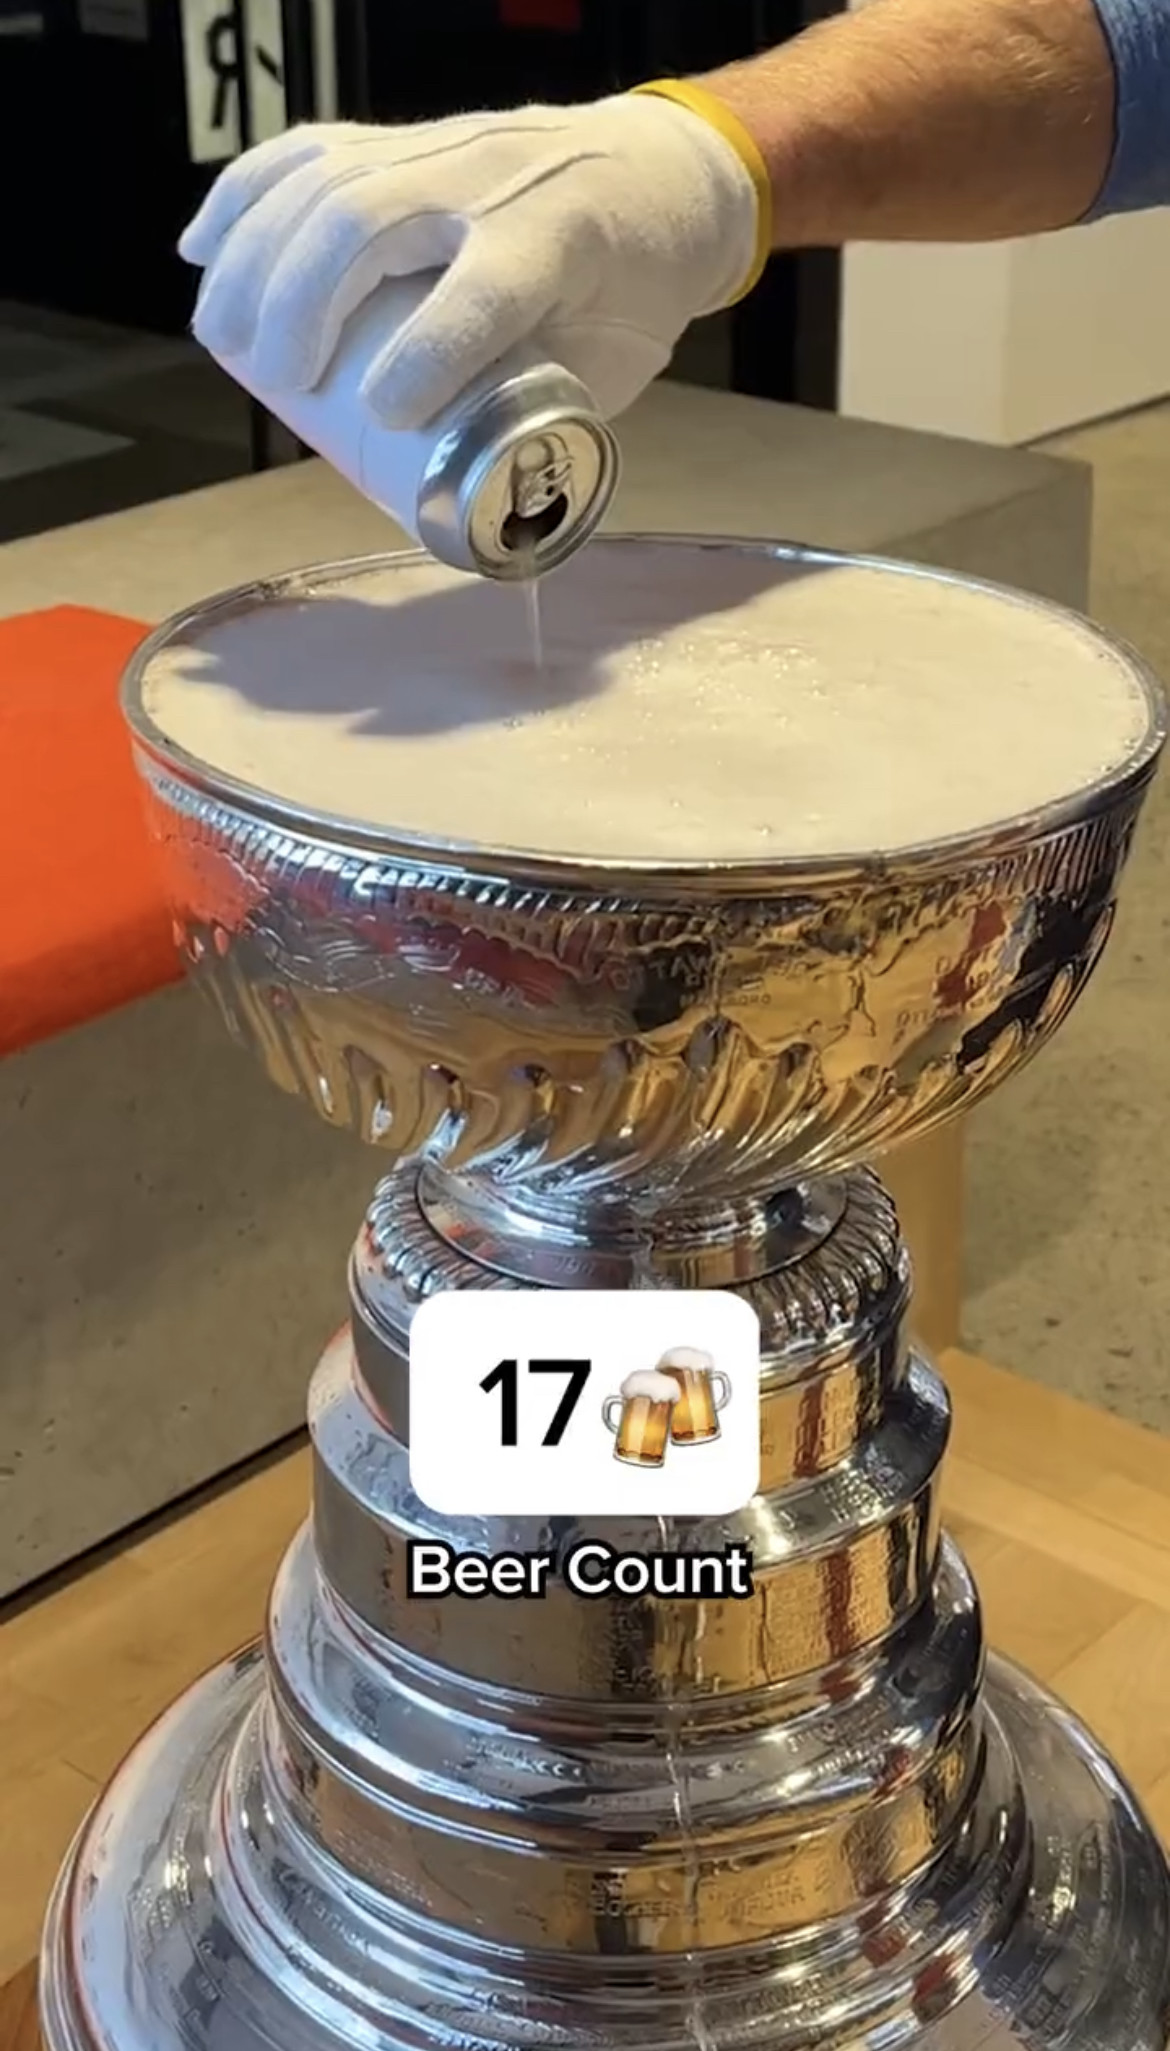 https://memestatic.fjcdn.com/pictures/How+many+beers+it+takes+to+fill+the+stanley+cup_69d3e4_10578750.jpg